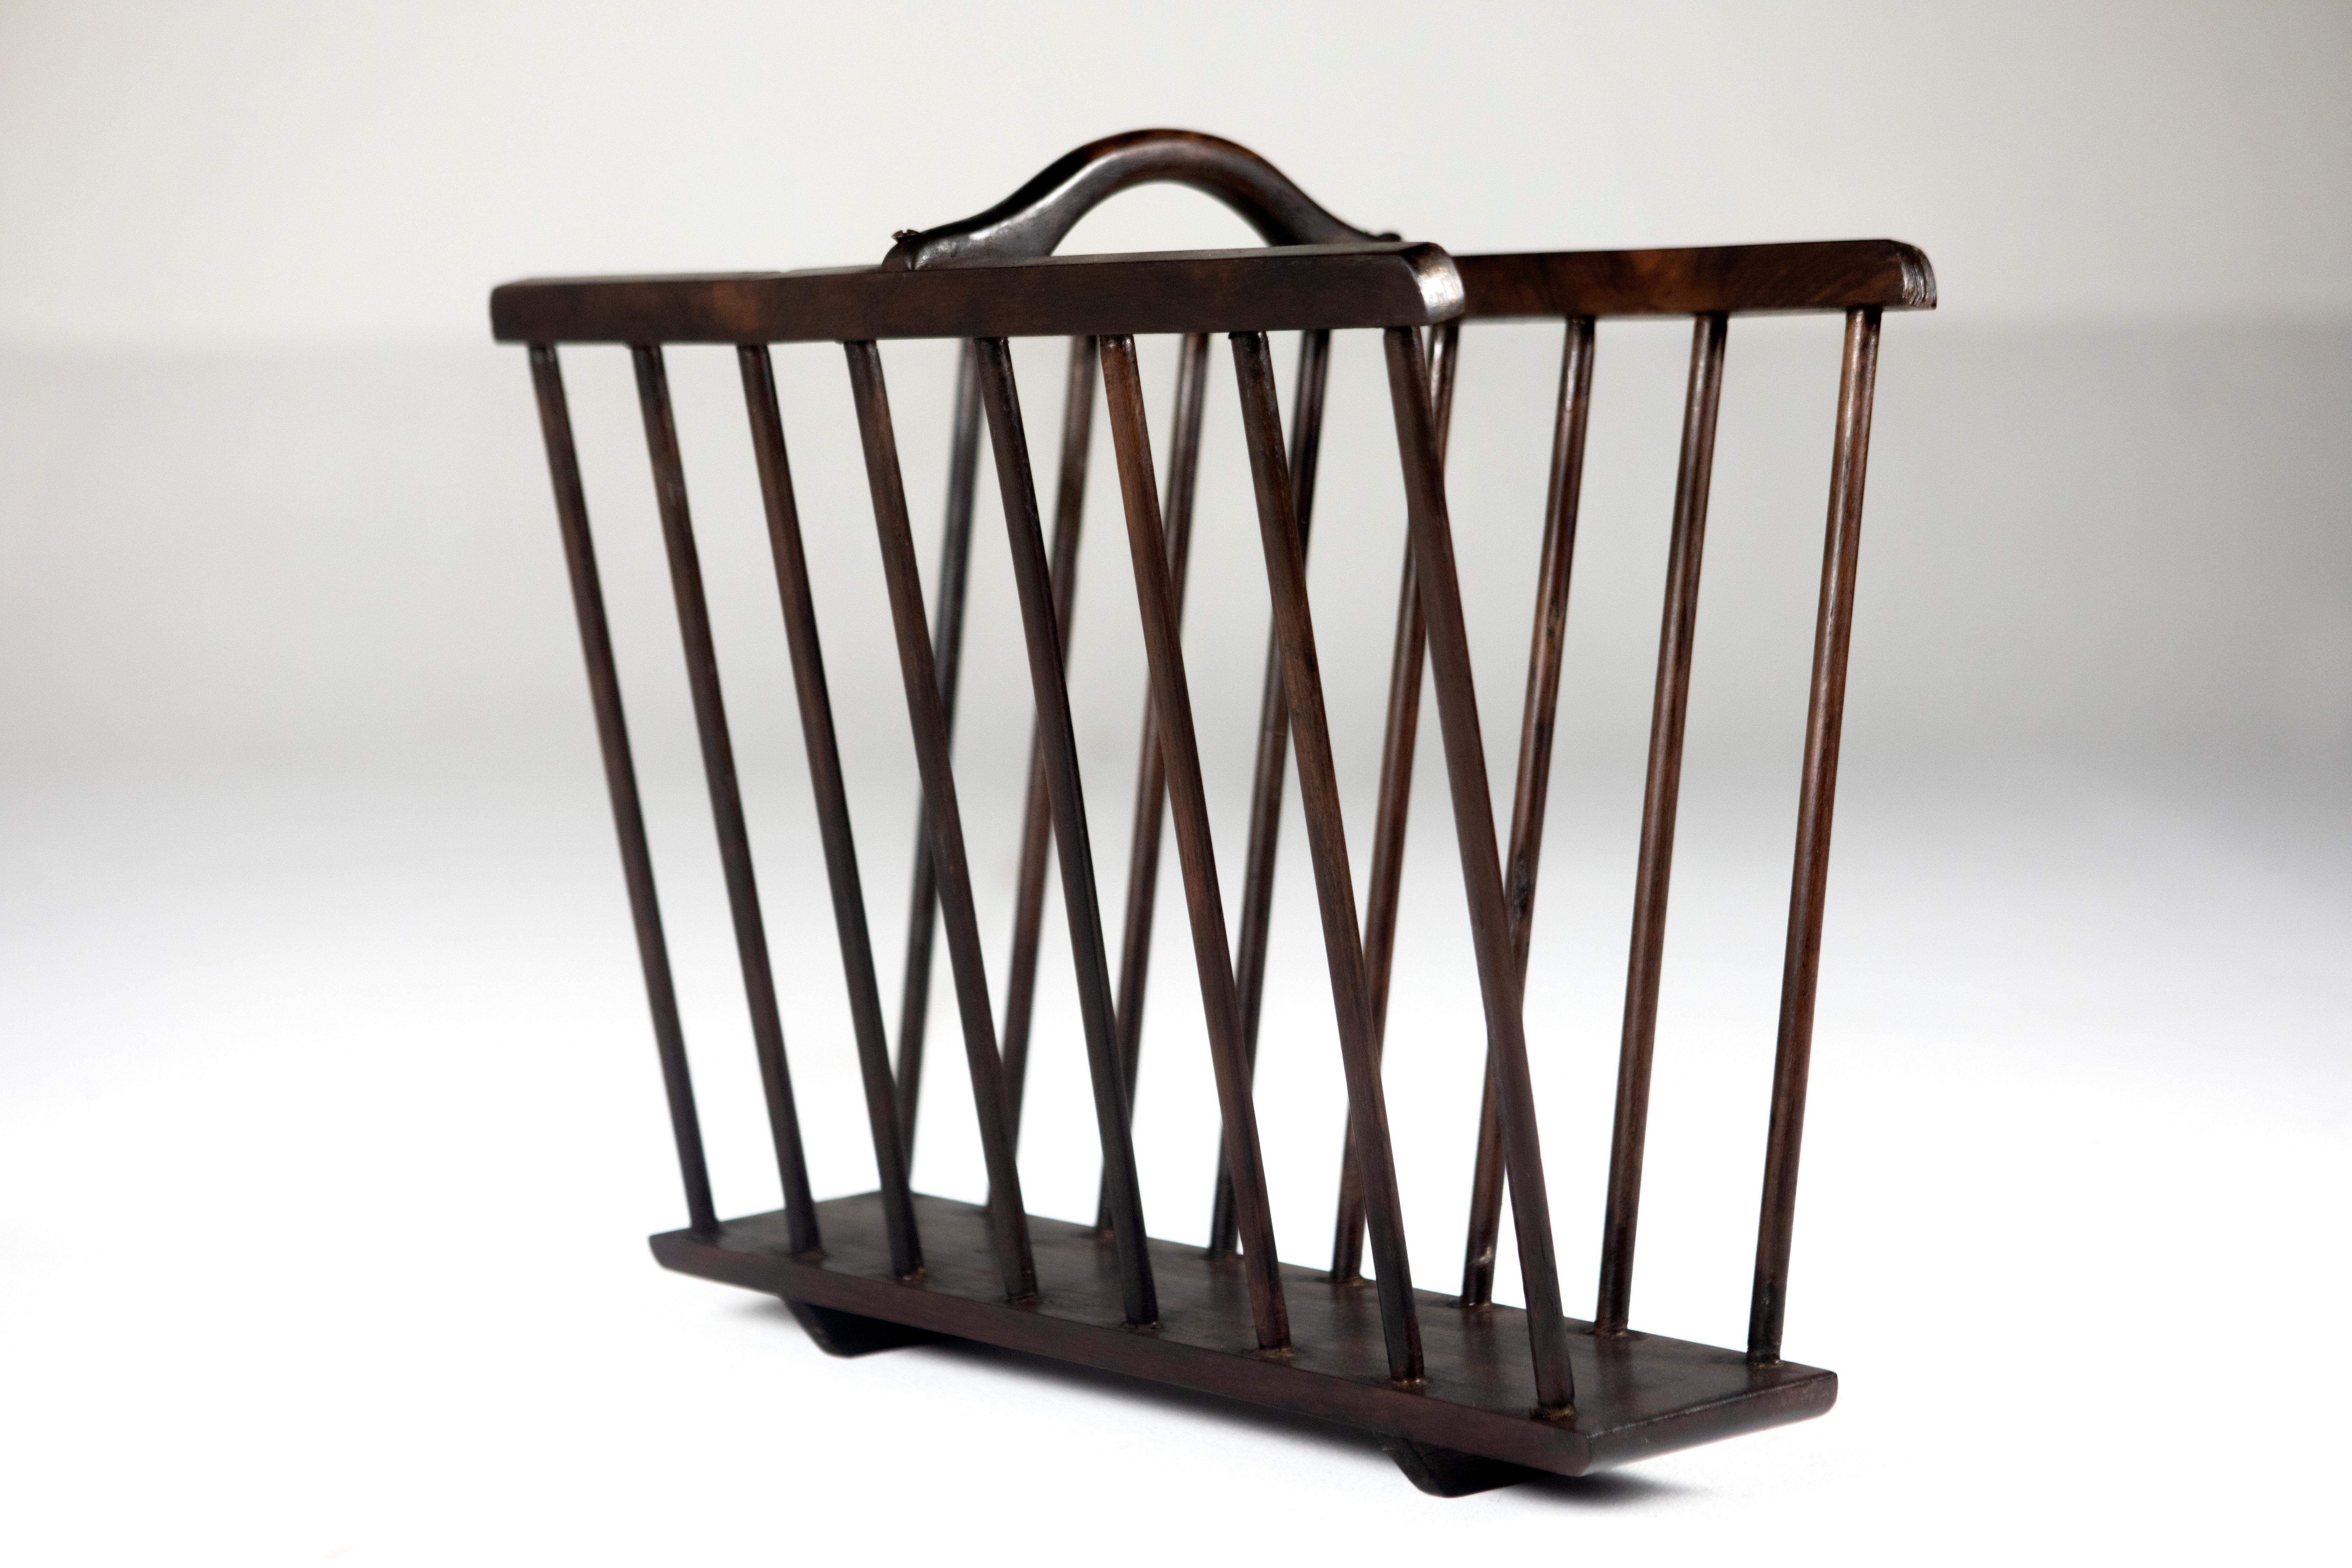 Mid-Century Modern wood magazine rack by Unattributed Brazilian Designer.

Made of solid wood and finished with varnish, this piece is part of a set of magazine racks and other pieces by unknown Brazilian artists from the 50's.